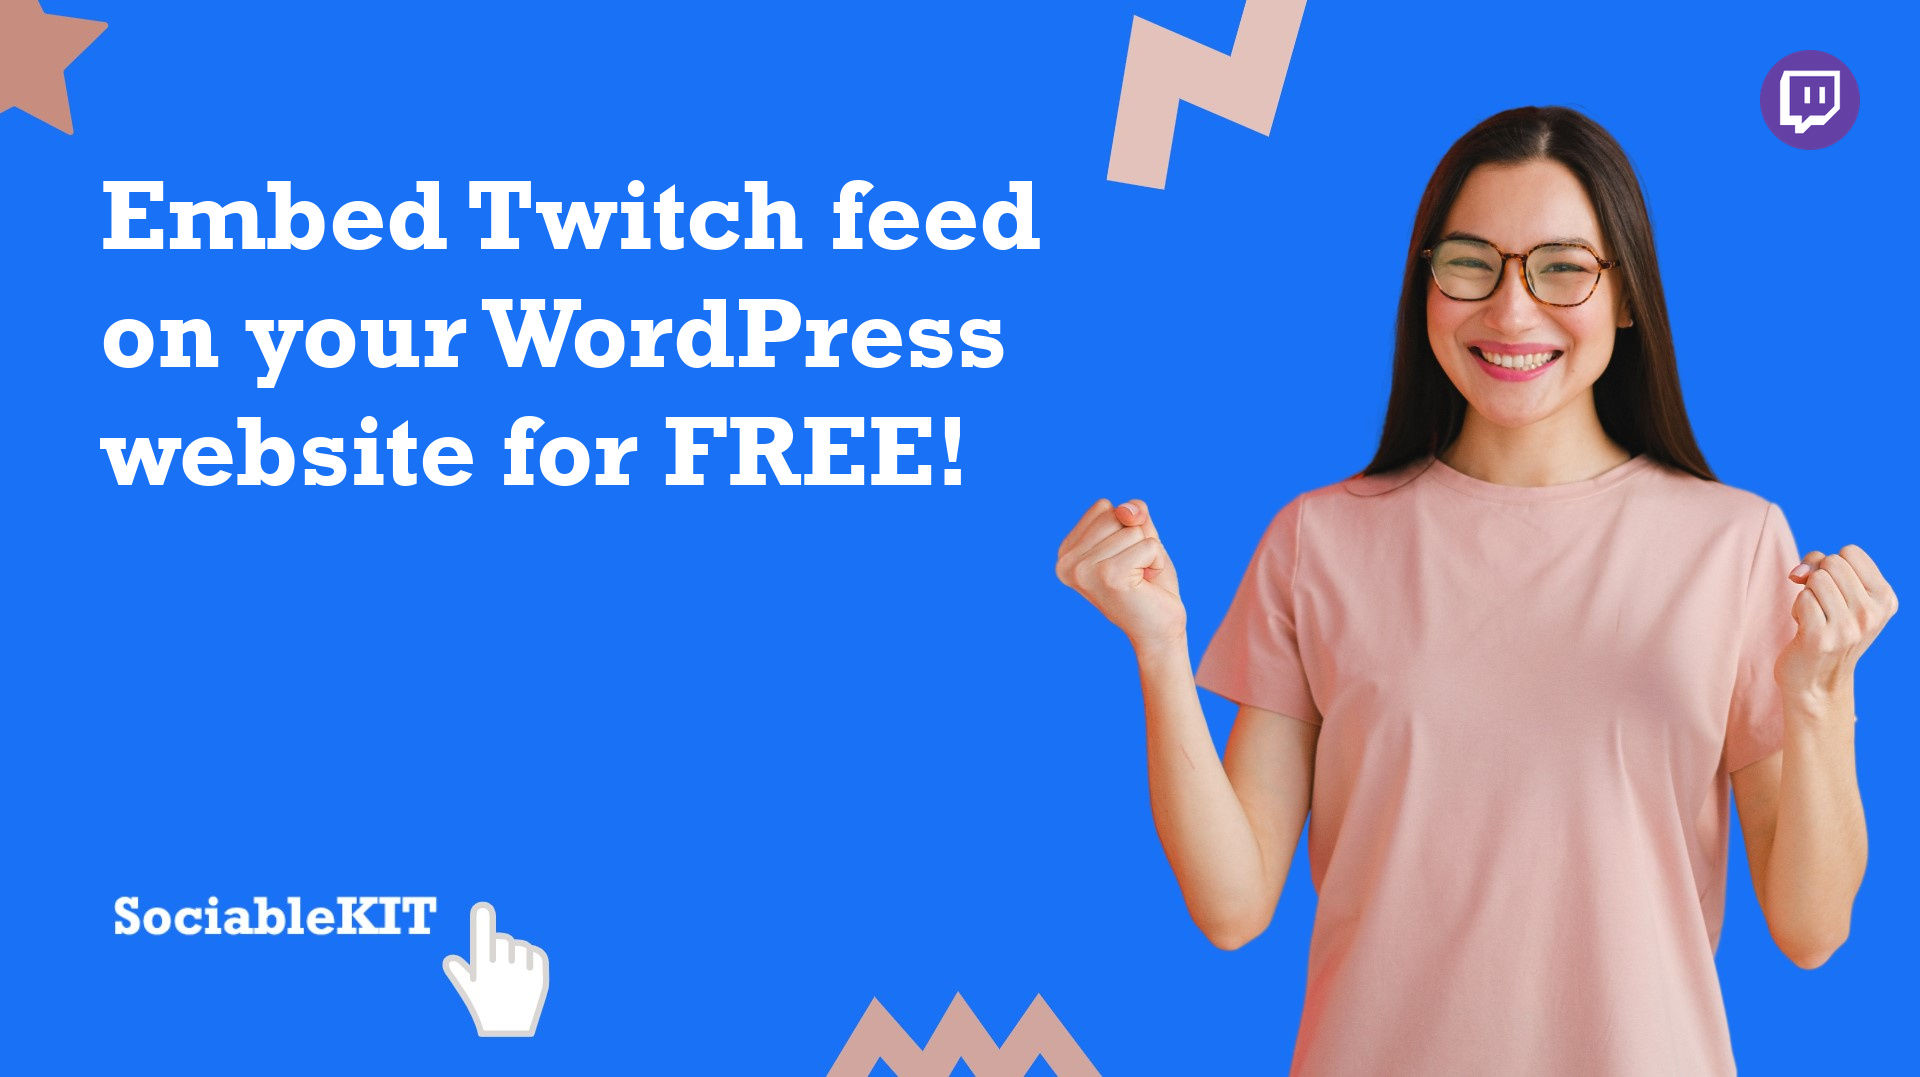 How to embed Twitch feed on your WordPress website for FREE?